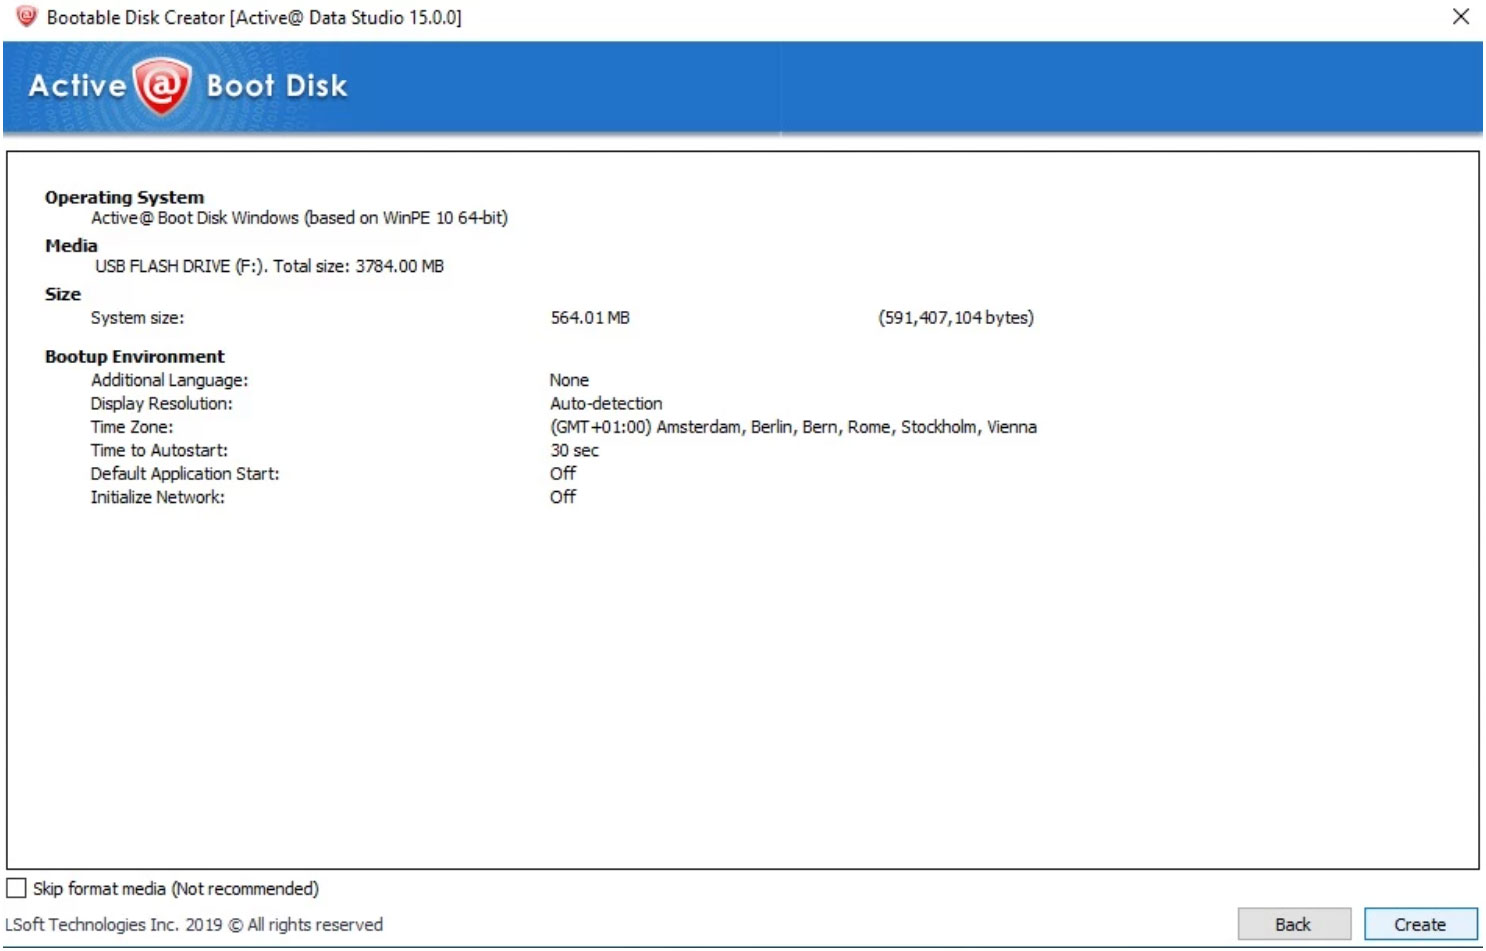 Create Bootable Disk Creator - Active@ Boot Disk